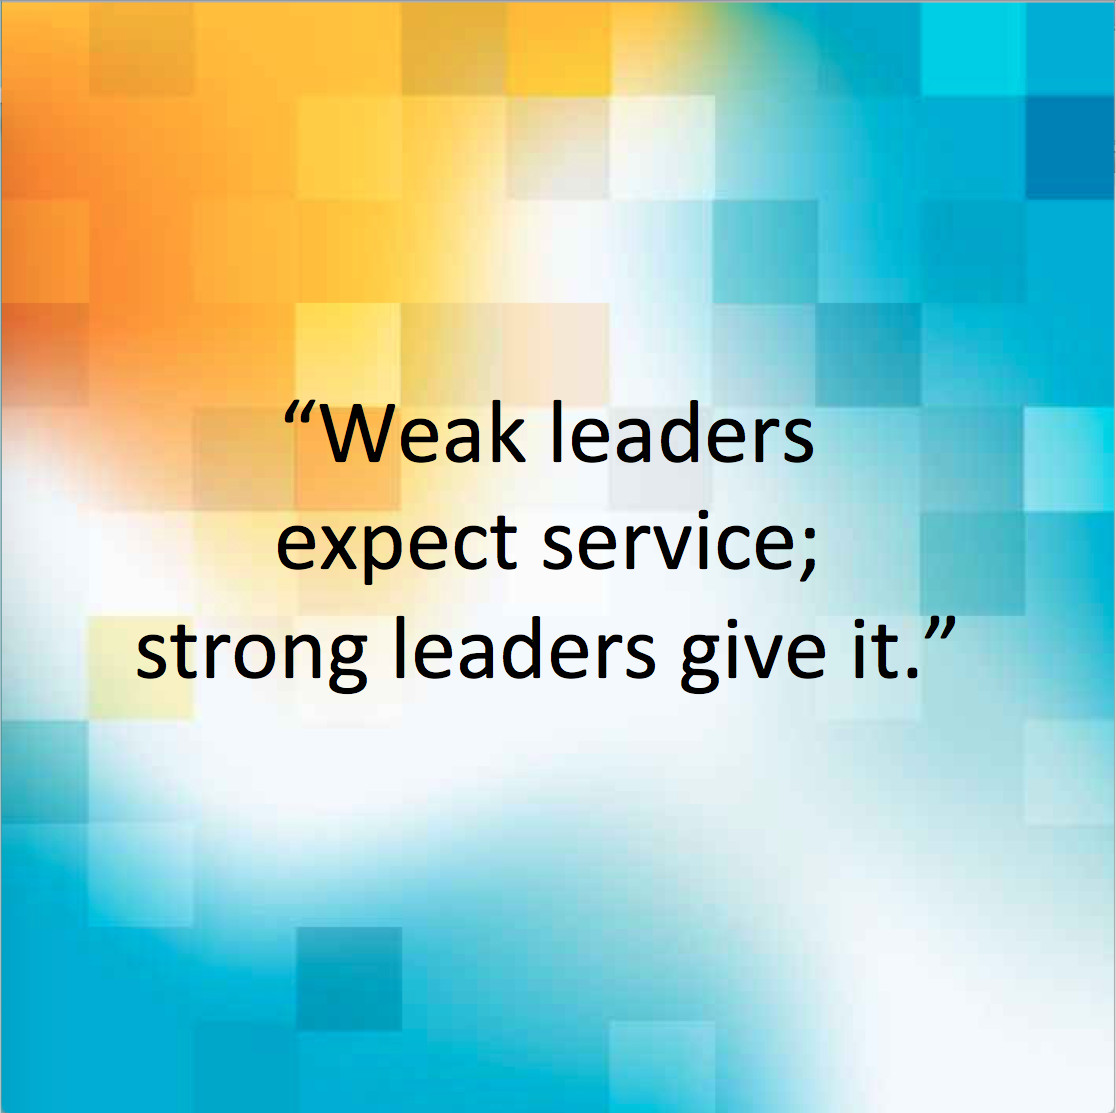 Quotes On Servant Leadership
 Keep on the Right Path through a Servant Leadership Focus